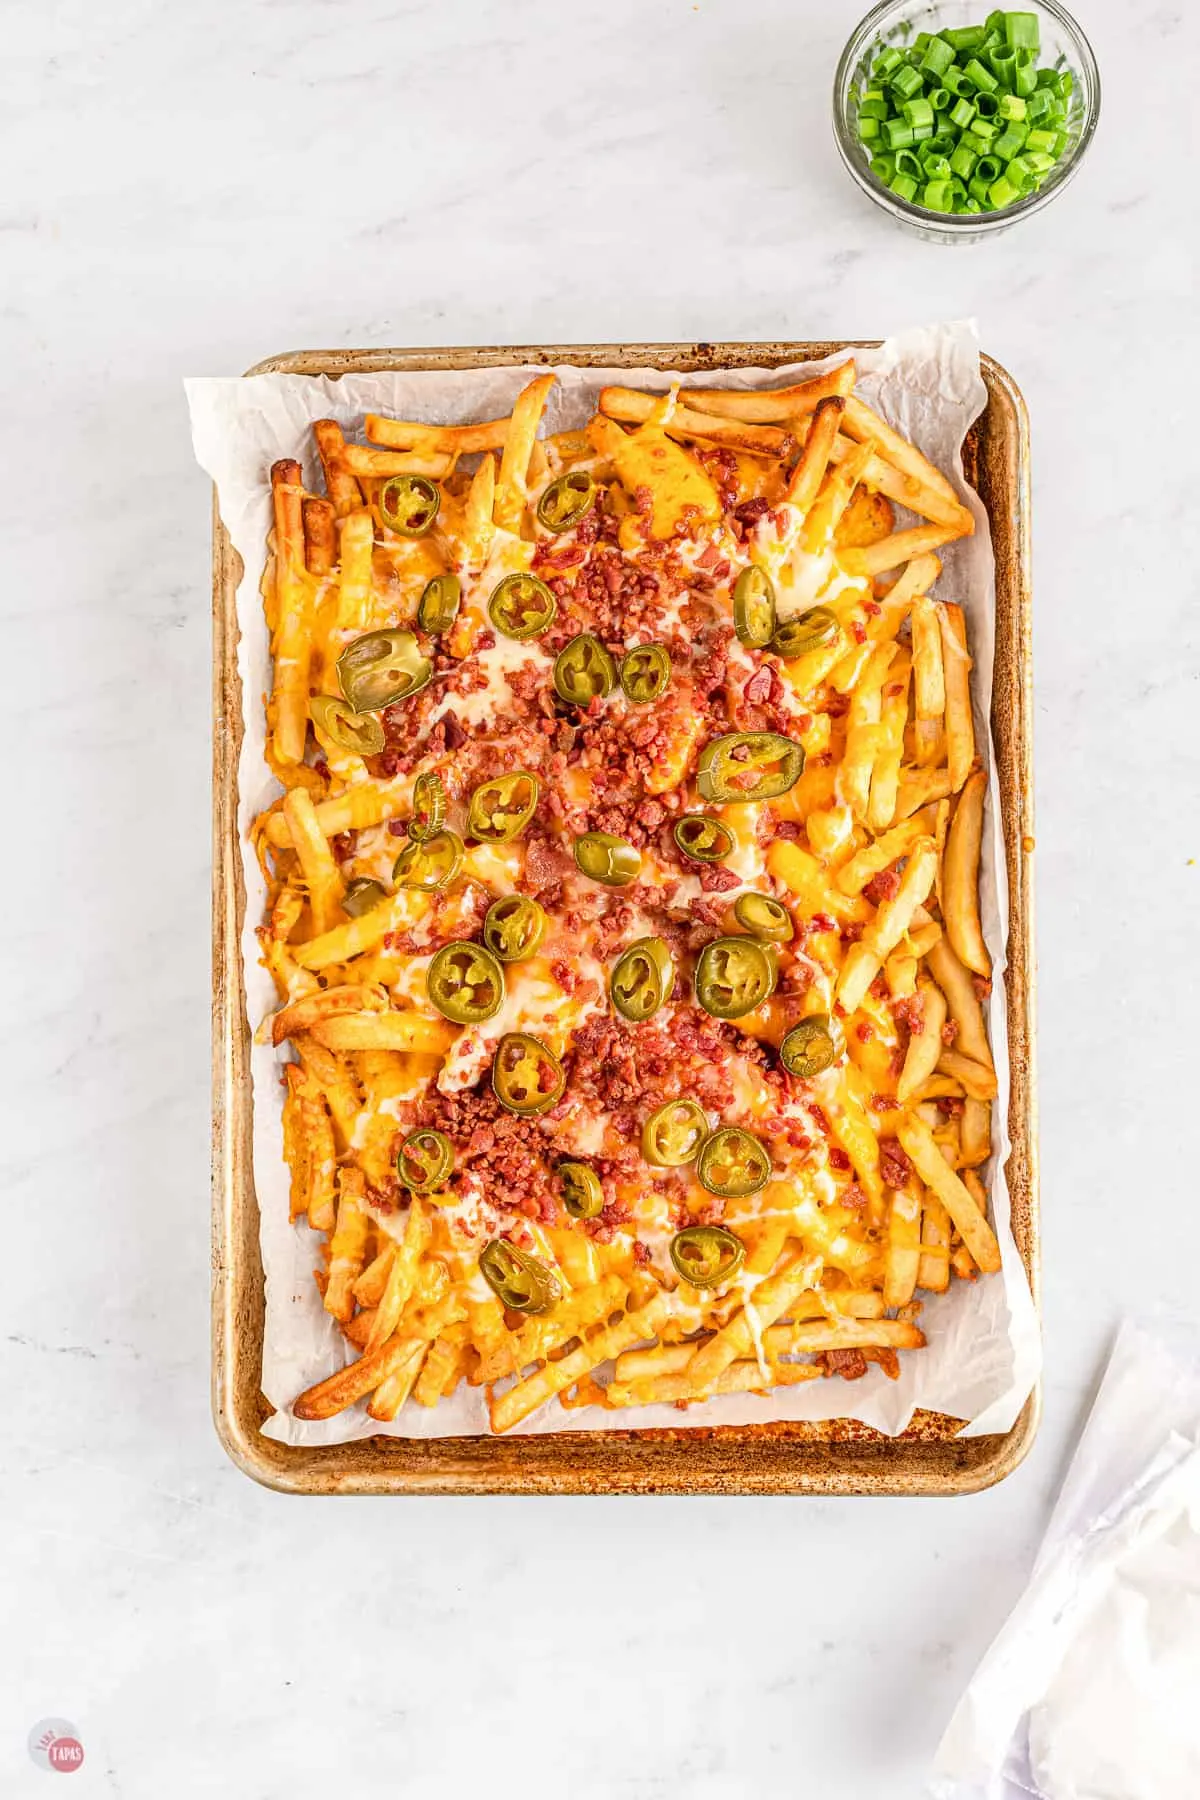 A baking tray lined with parchment paper filled with baked french fries topped with shredded cheese, bacon crumbles, and sliced jalapeños.